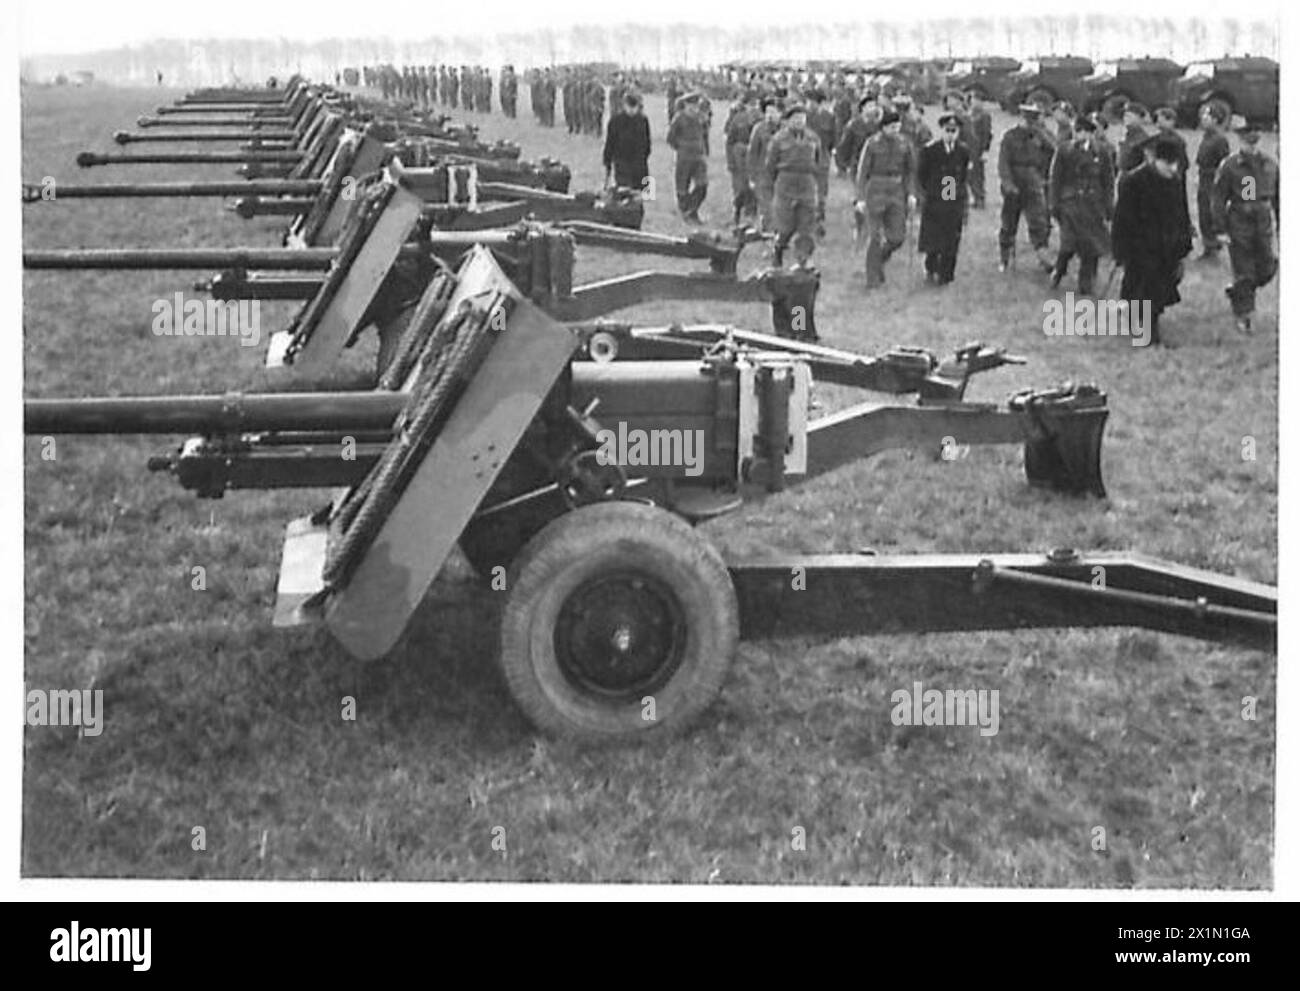 THE PRIME MINISTER IN YORKSHIRE - The Prime Minister walking past the 17-pounder Anti-Tank guns of an Anti-Tank Regiment, British Army Stock Photo